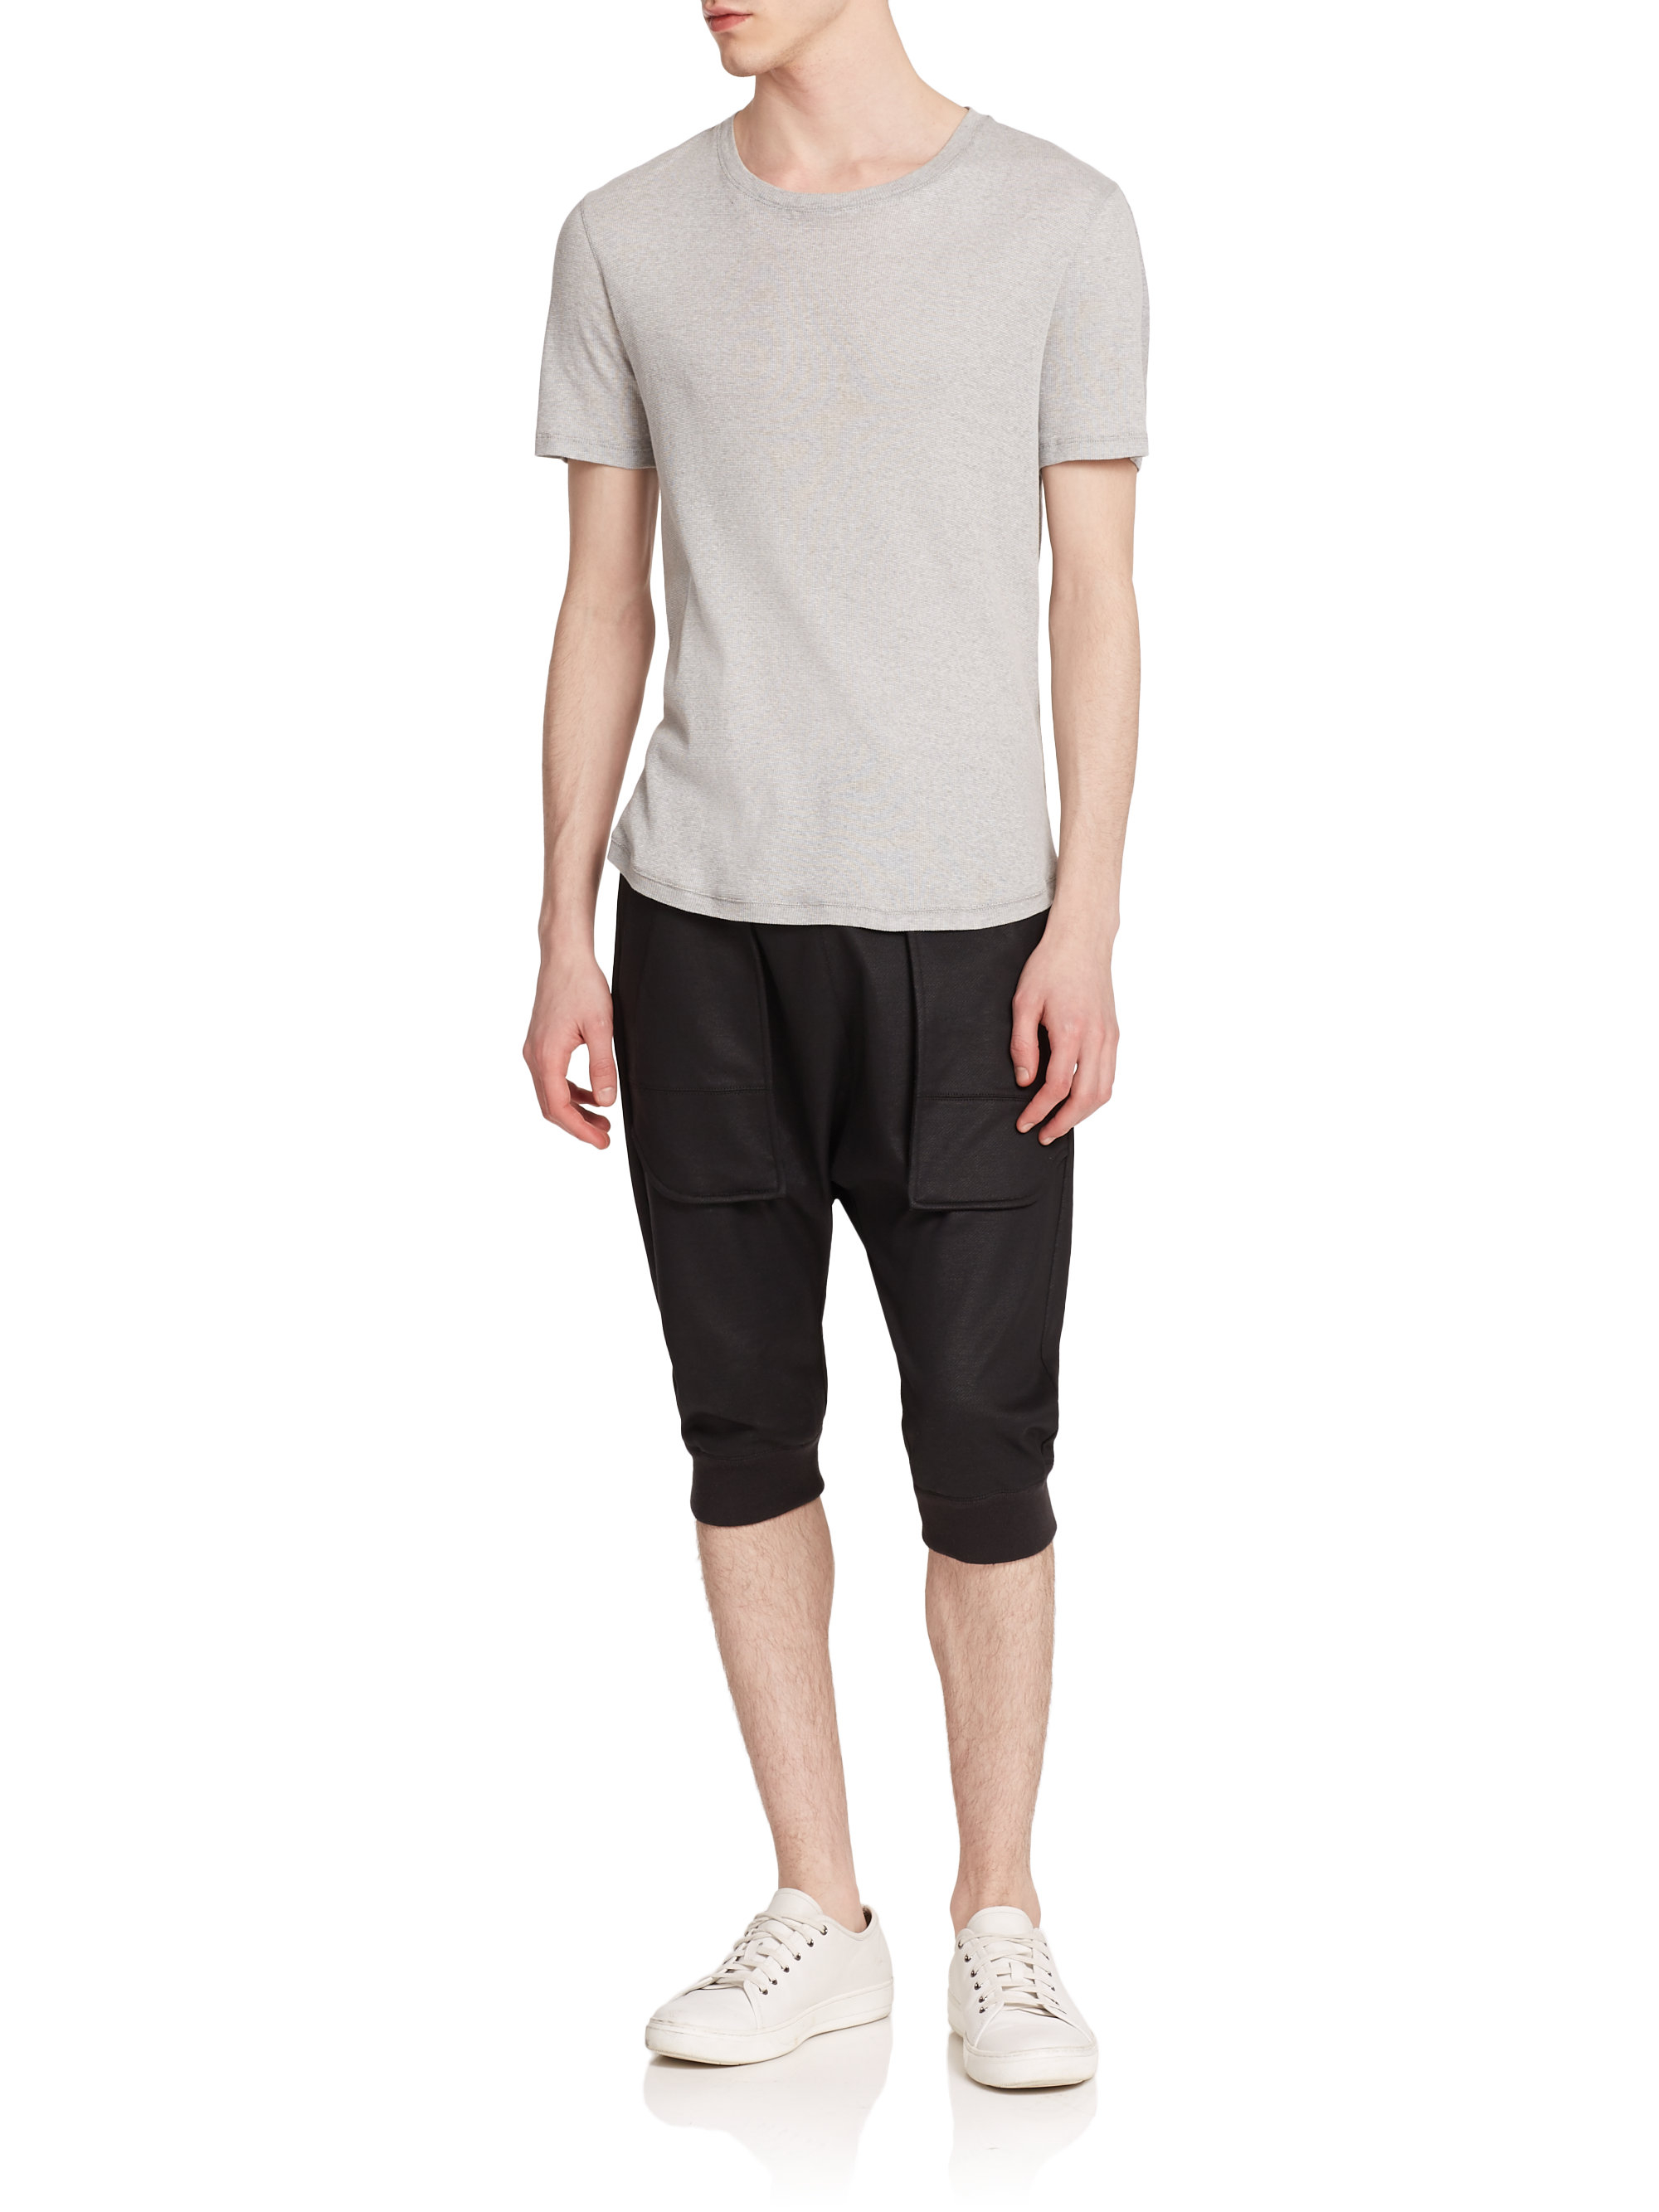 Lyst - Helmut Lang Cotton Terry Dropped-rise Shorts in Black for Men